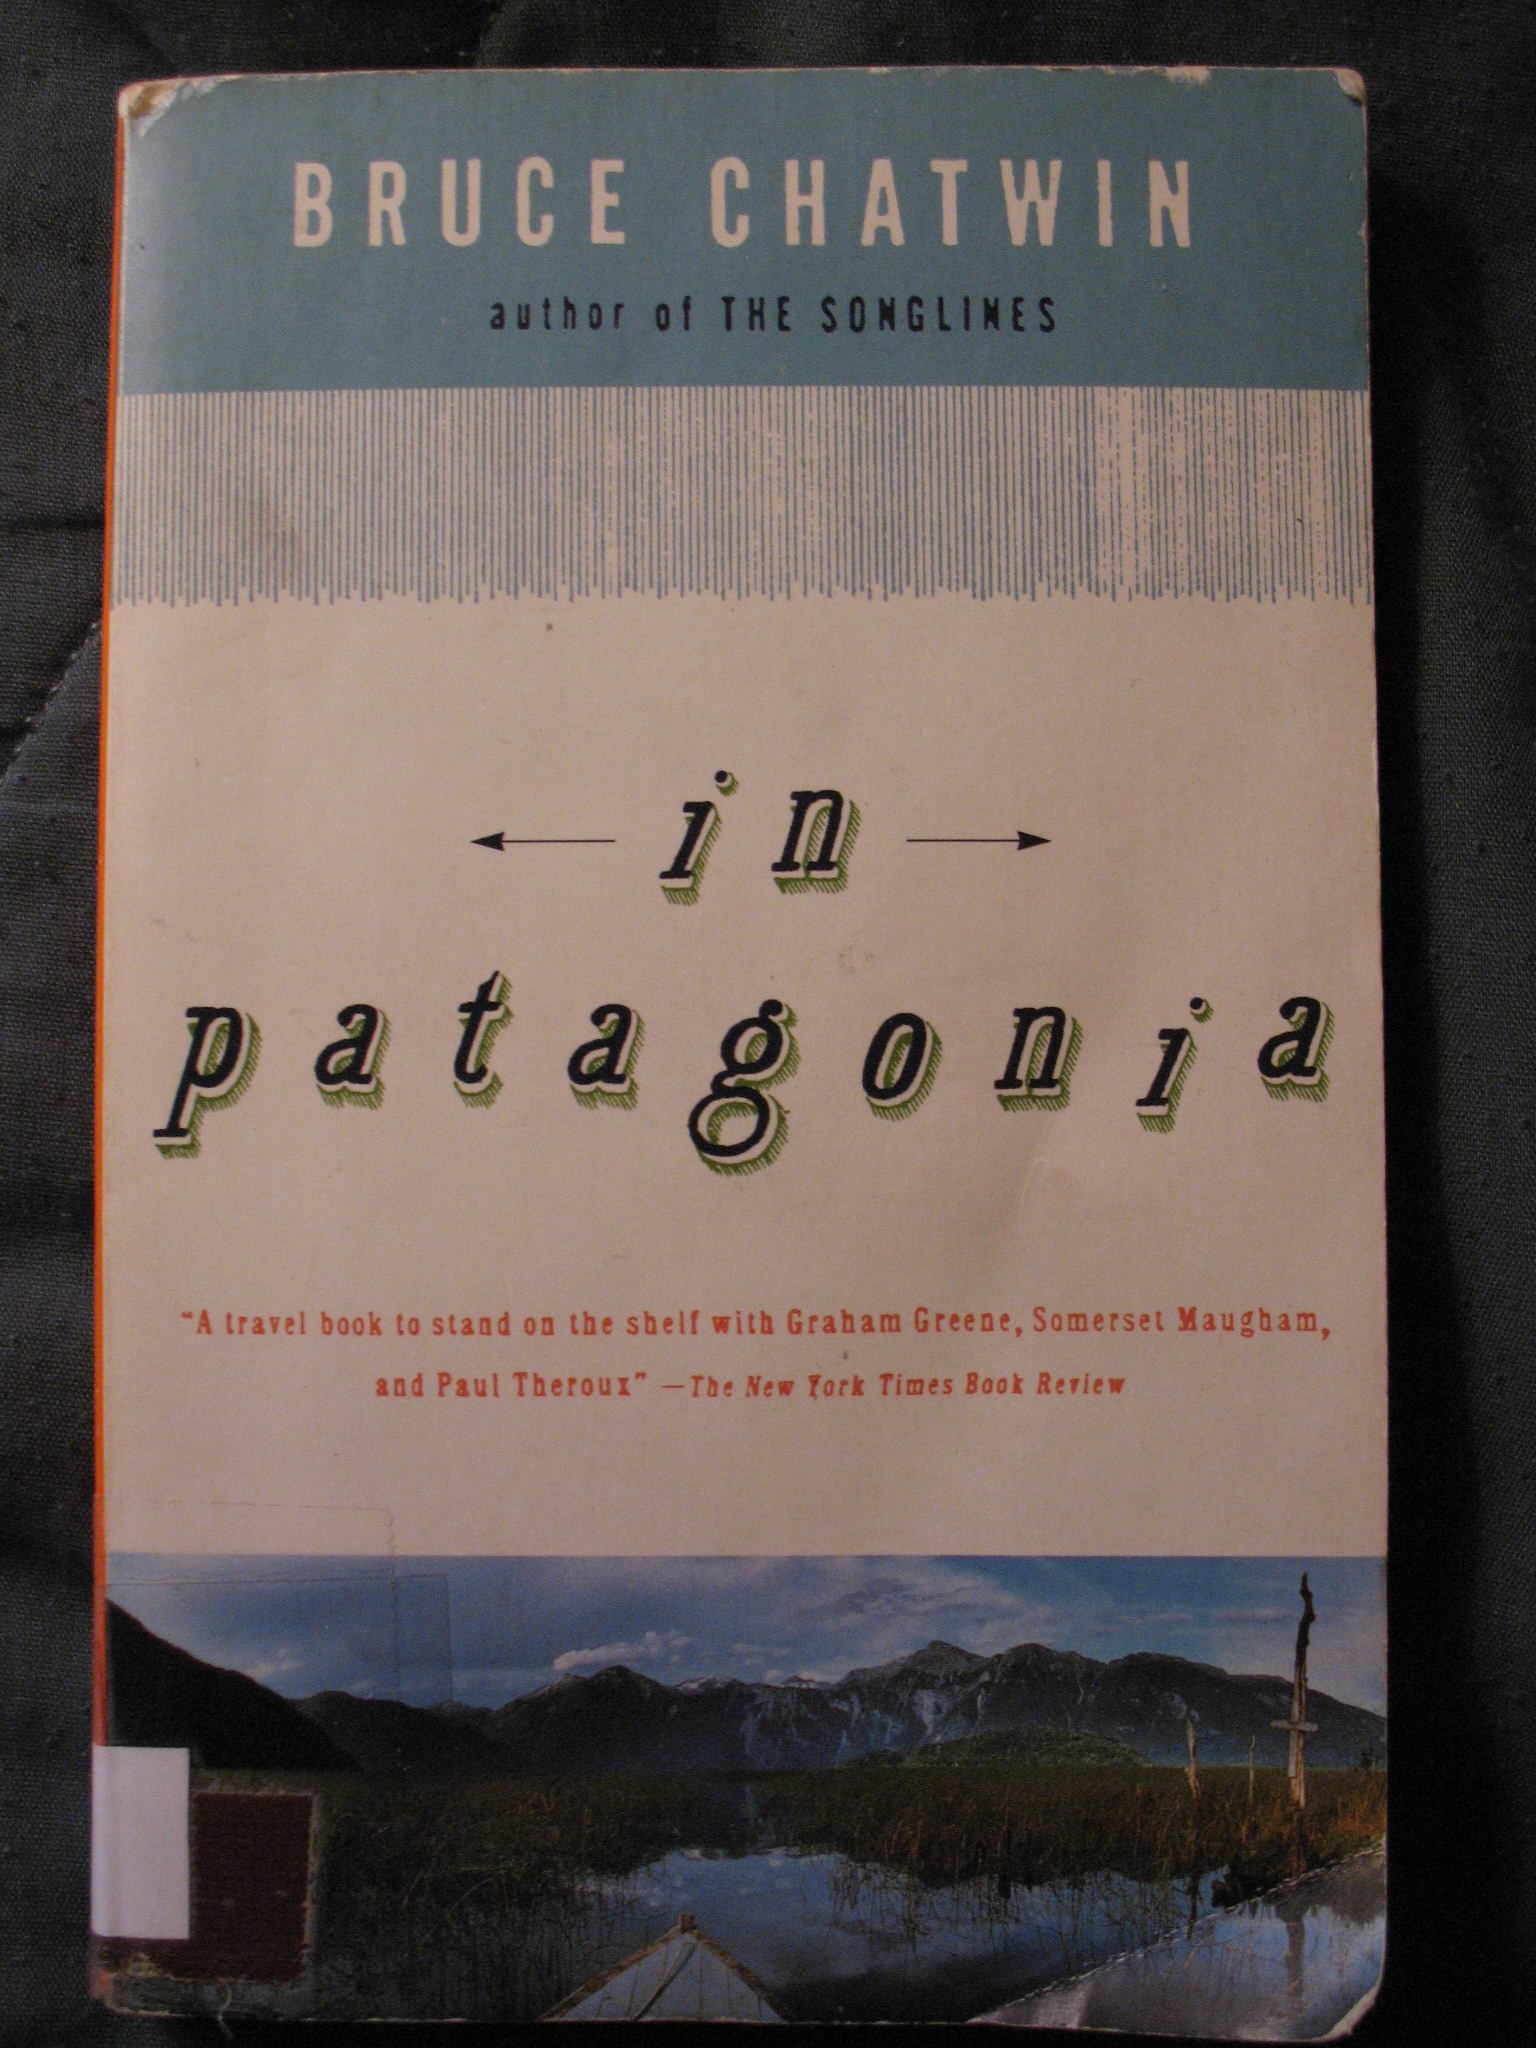 In Patagonia by Bruce Chatwin | A Good Stopping Point